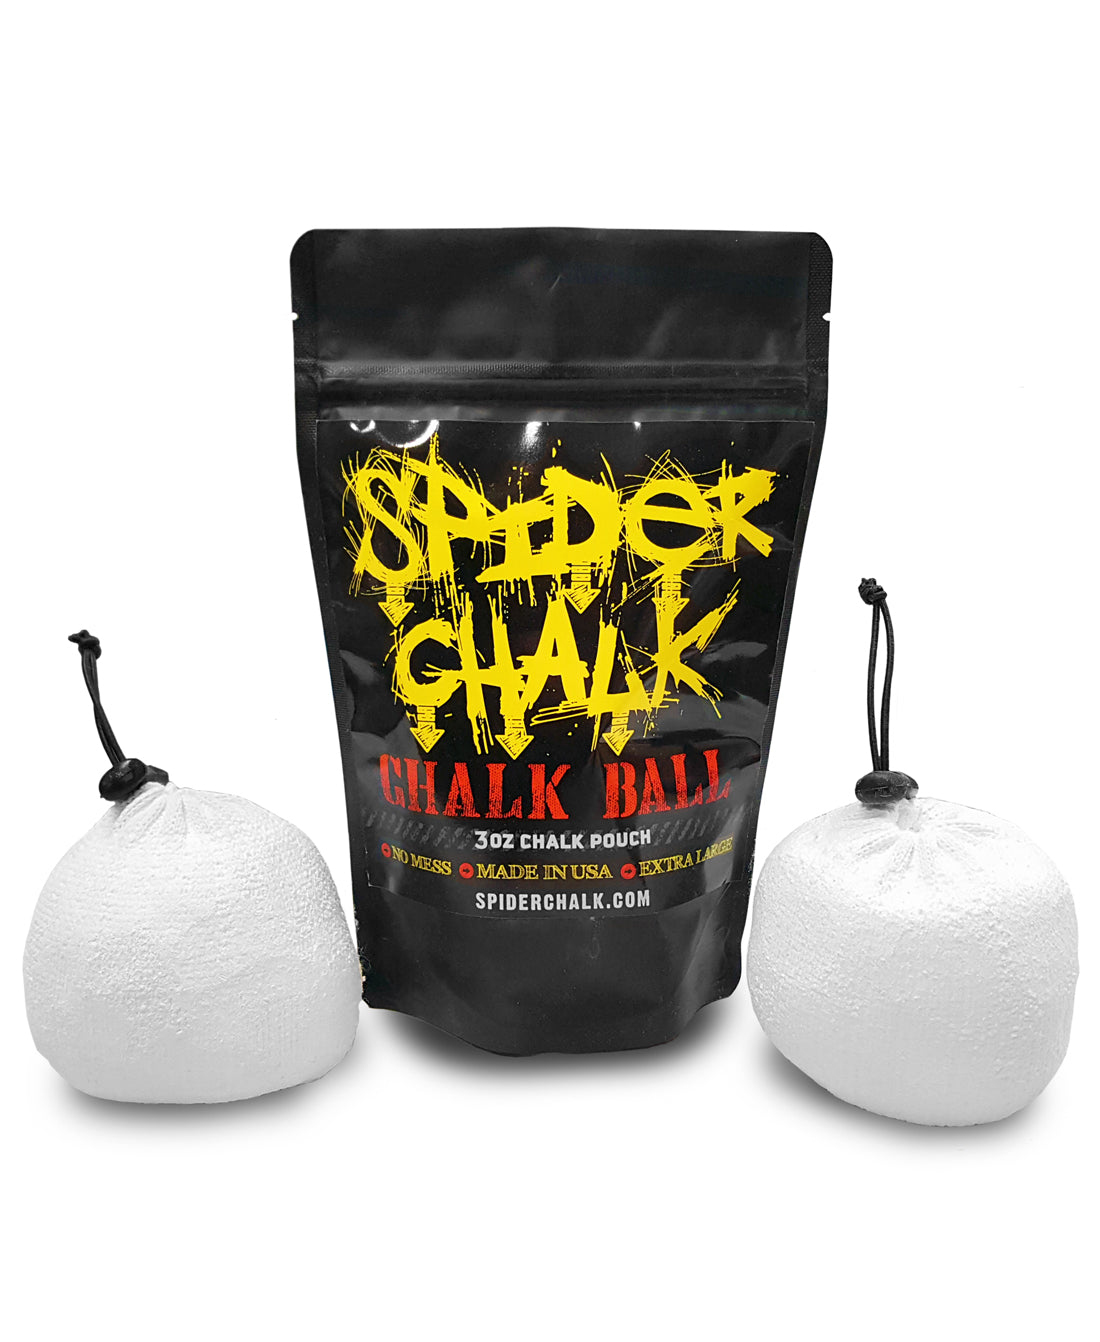 The Refillable Chalk Ball Story